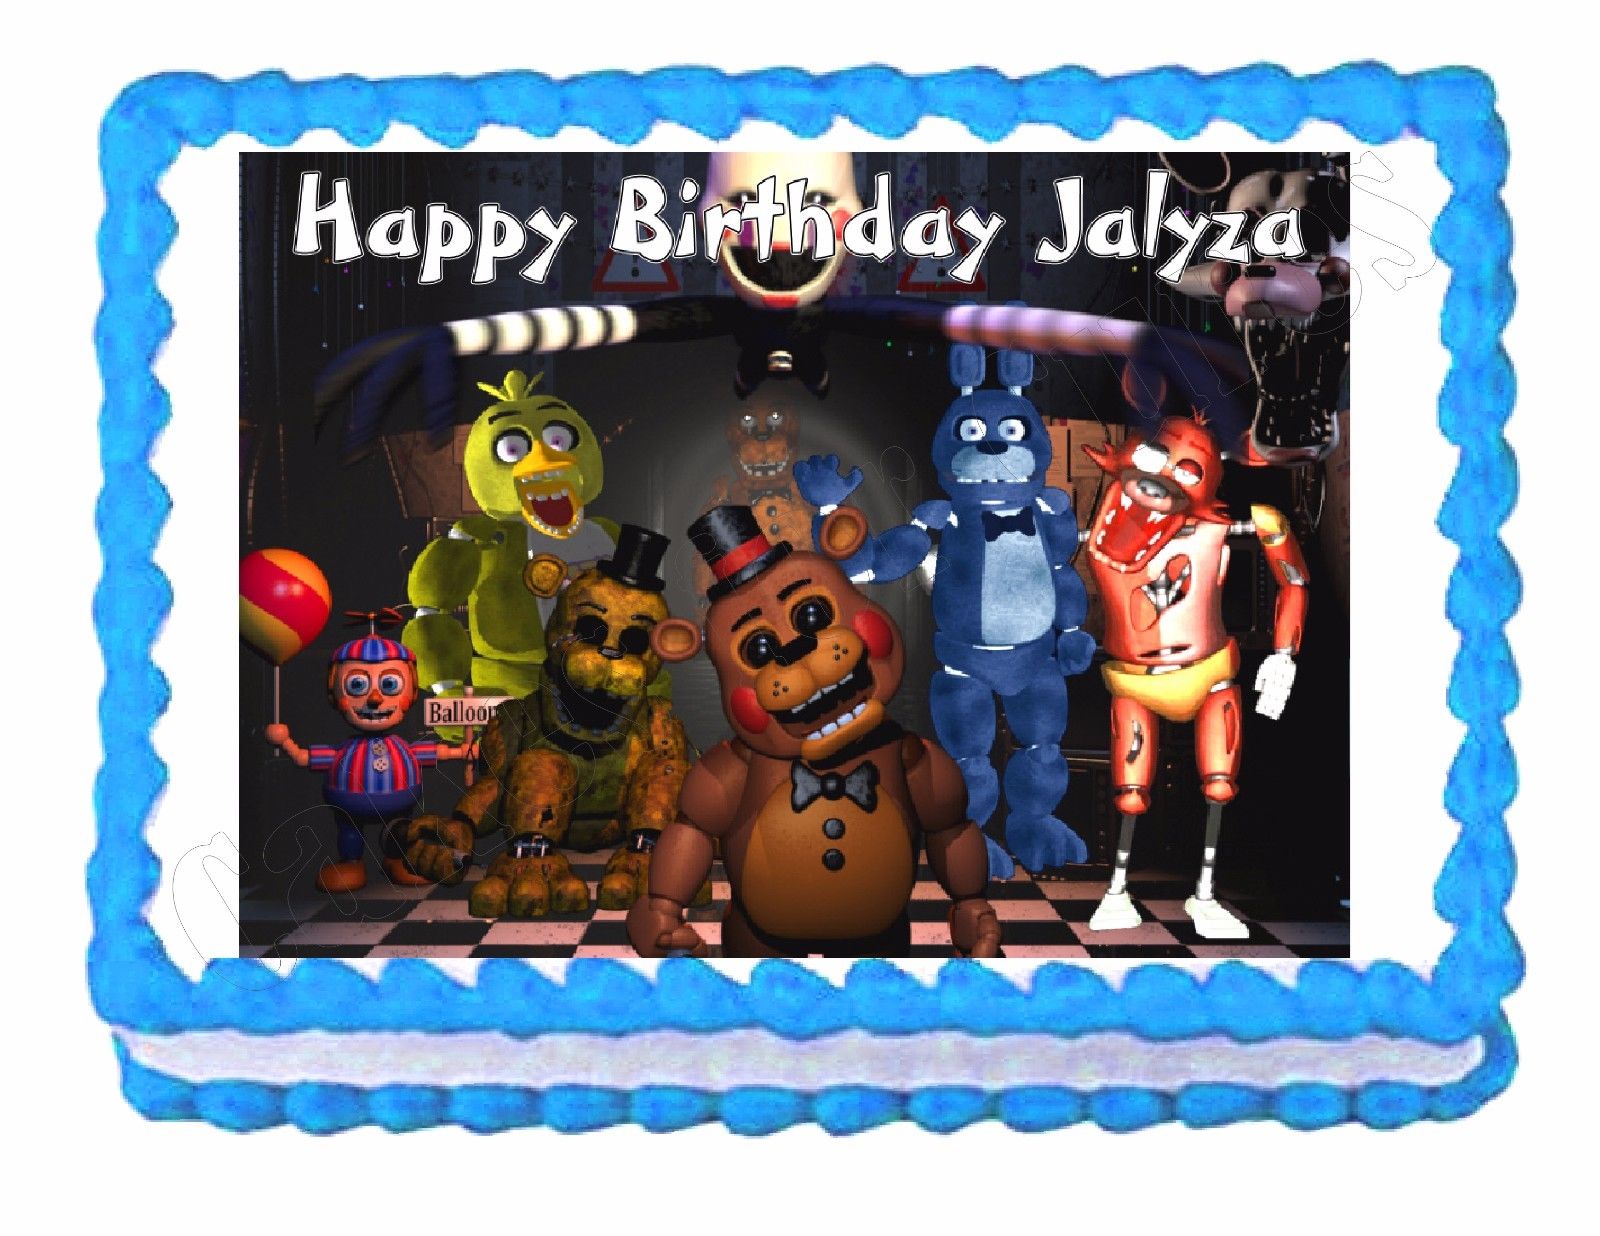 Five Nights At Freddy's Personalized Edible Cake Topper Image -- 1/4 Sheet  -- 8 x 10.5 